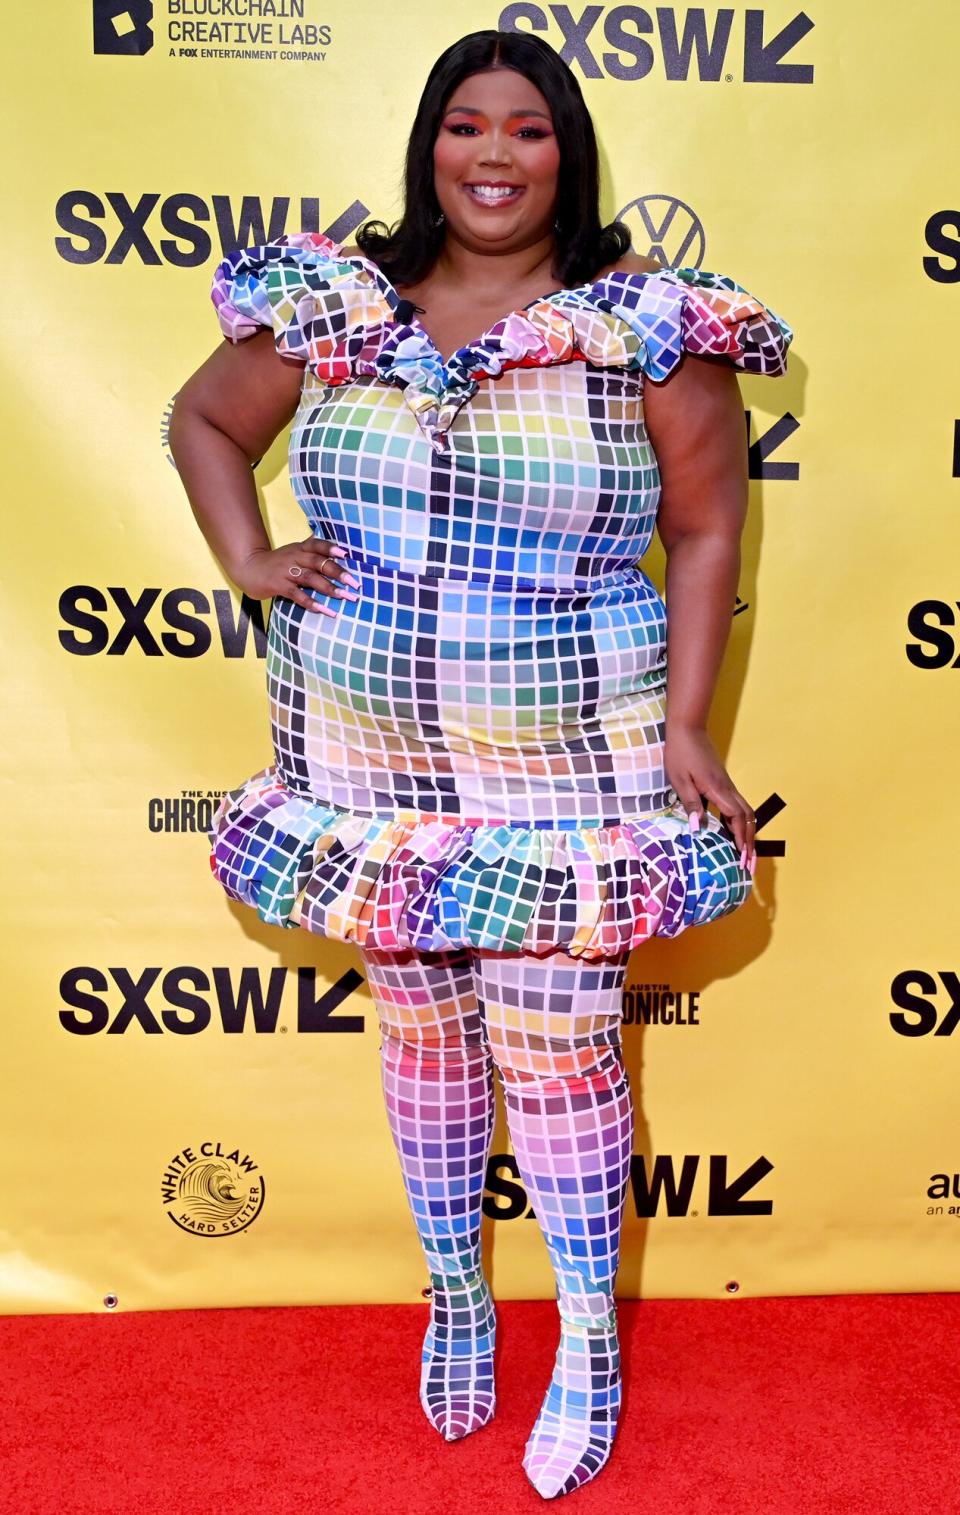 Lizzo attends the 2022 SXSW Conference and Festivals at Austin Convention Center on March 13, 2022 in Austin, Texas